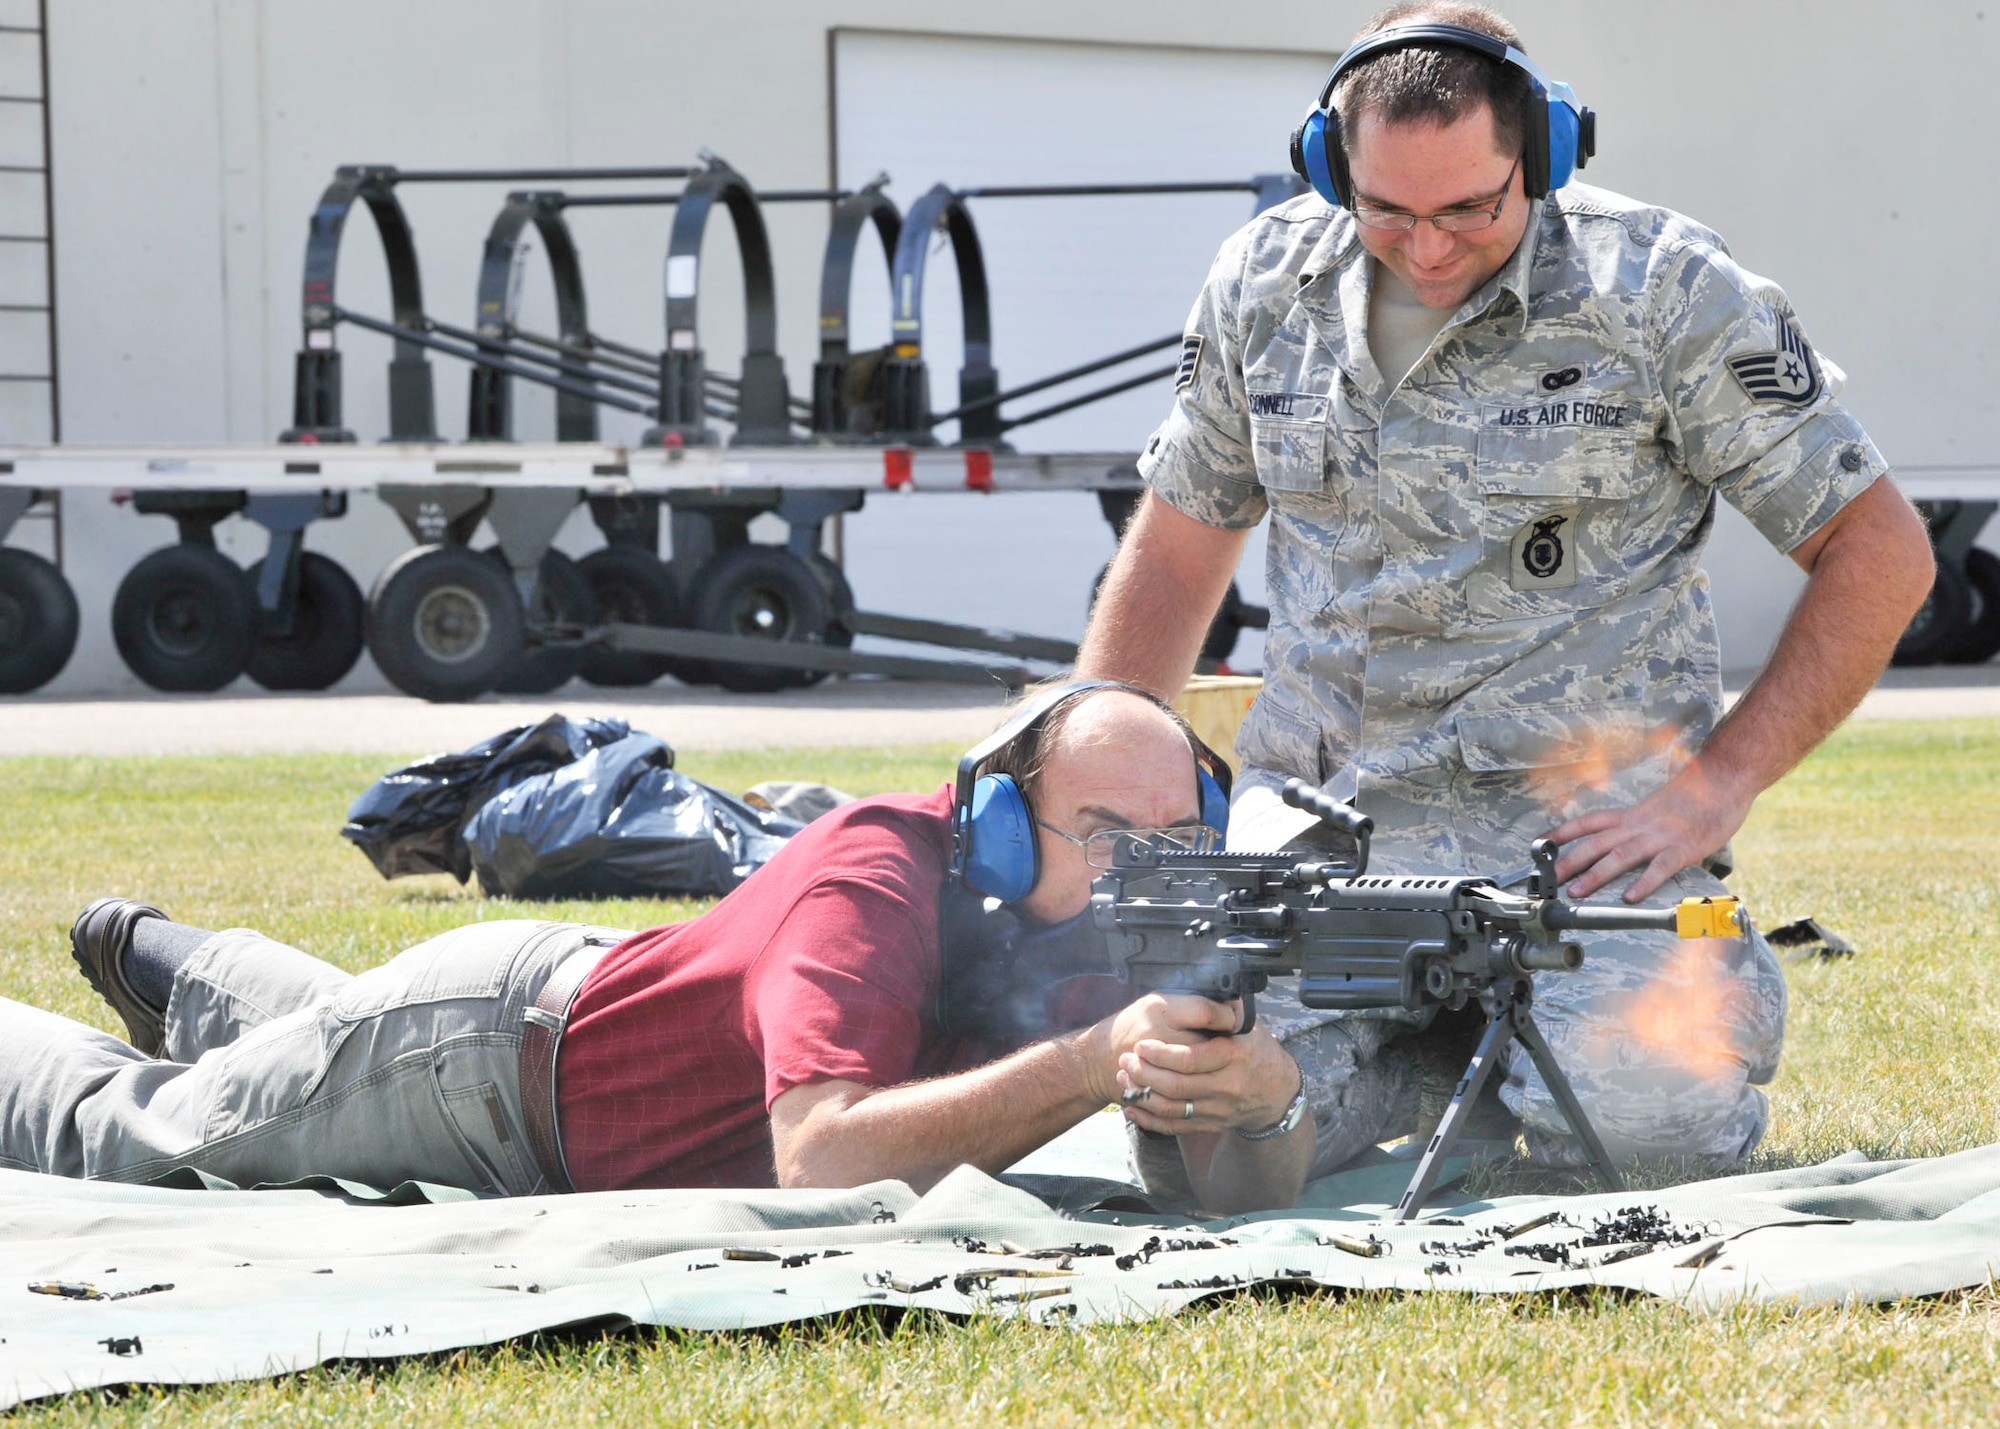 A family member fires blanks from an M60 machine gun while being observed by a member of the 120th Security Forces Squadron during the Montana Air National Guard Family Day on Aug. 11, 2012. (U.S. Air Force photo/Staff Sgt. John Turner)